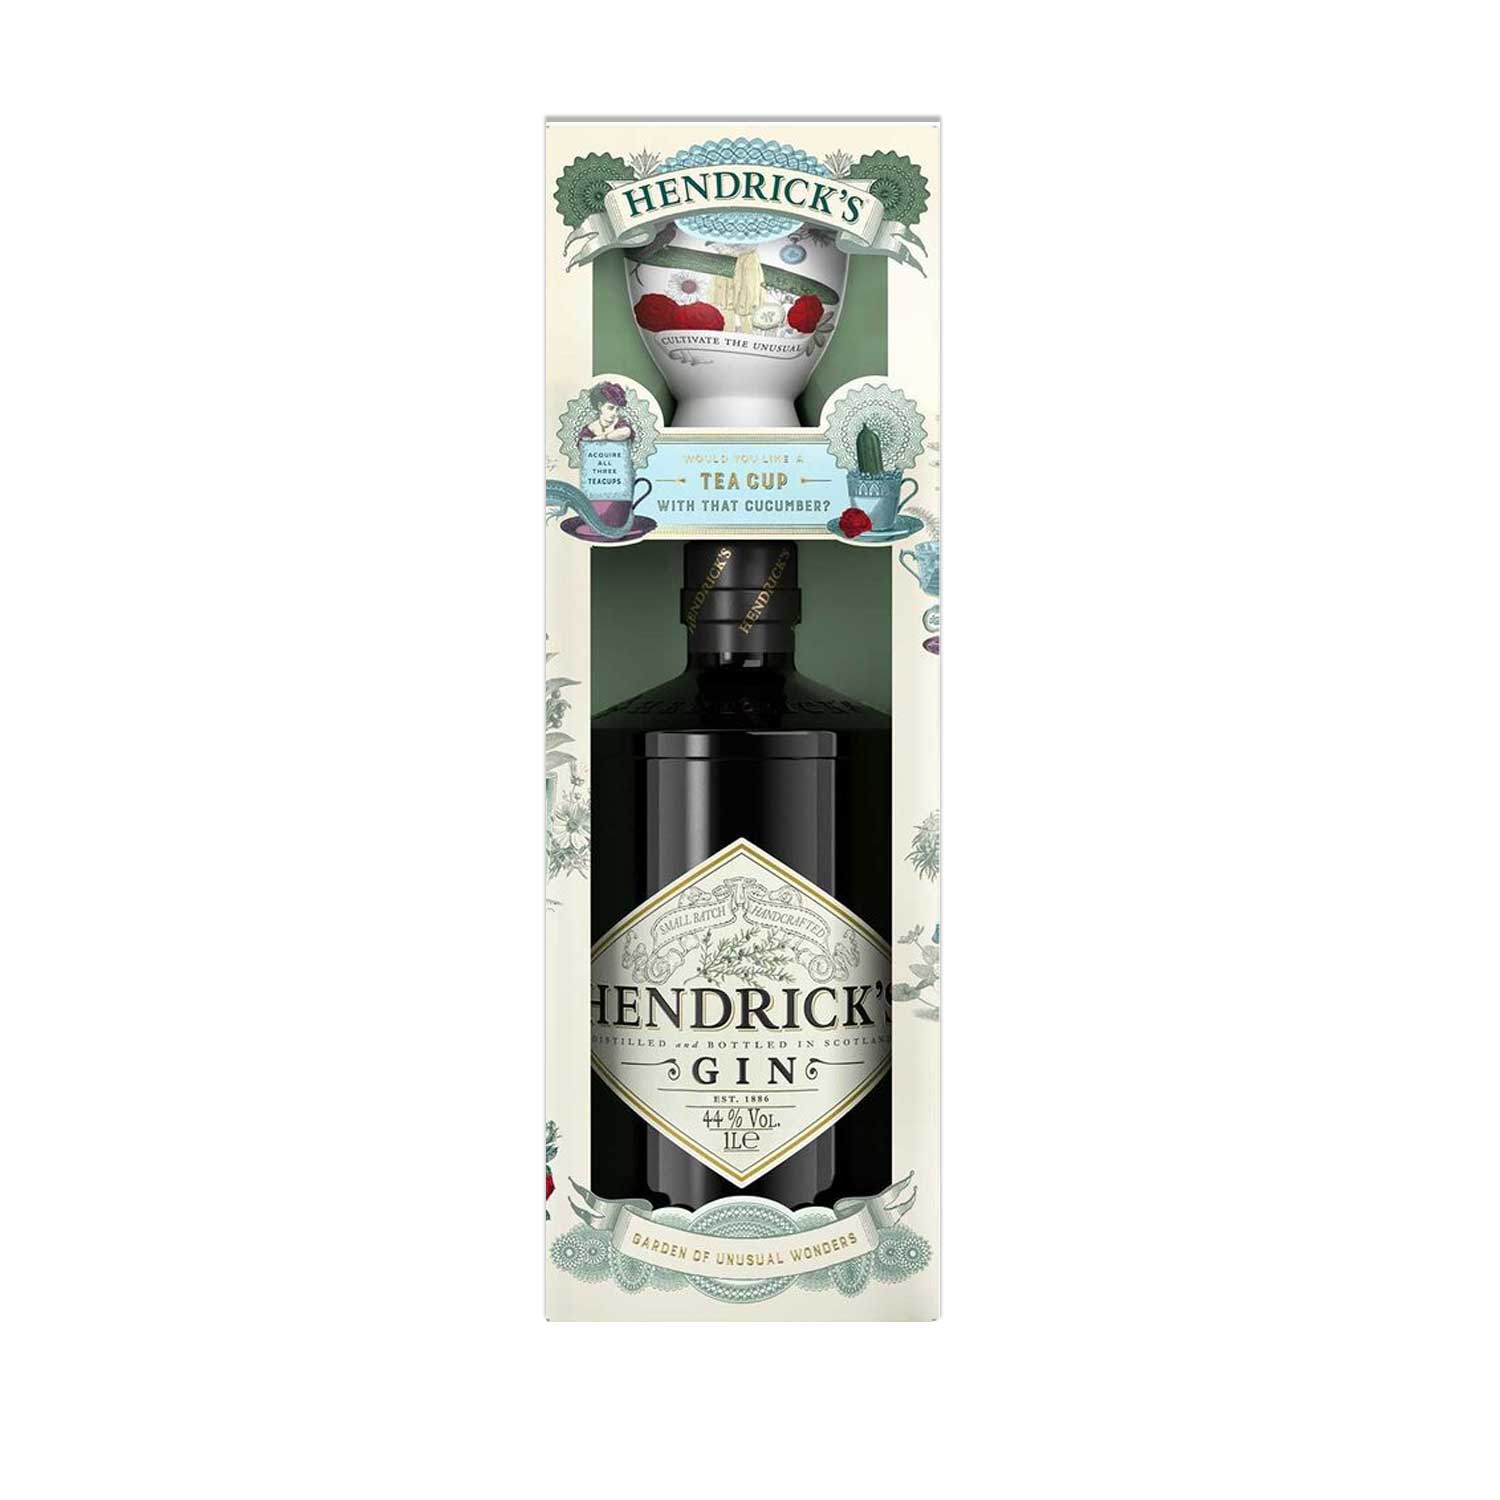 HENDRICK'S GIN TEATIME TEA CUP WITH SAUCER SET, 1L – Dream Works